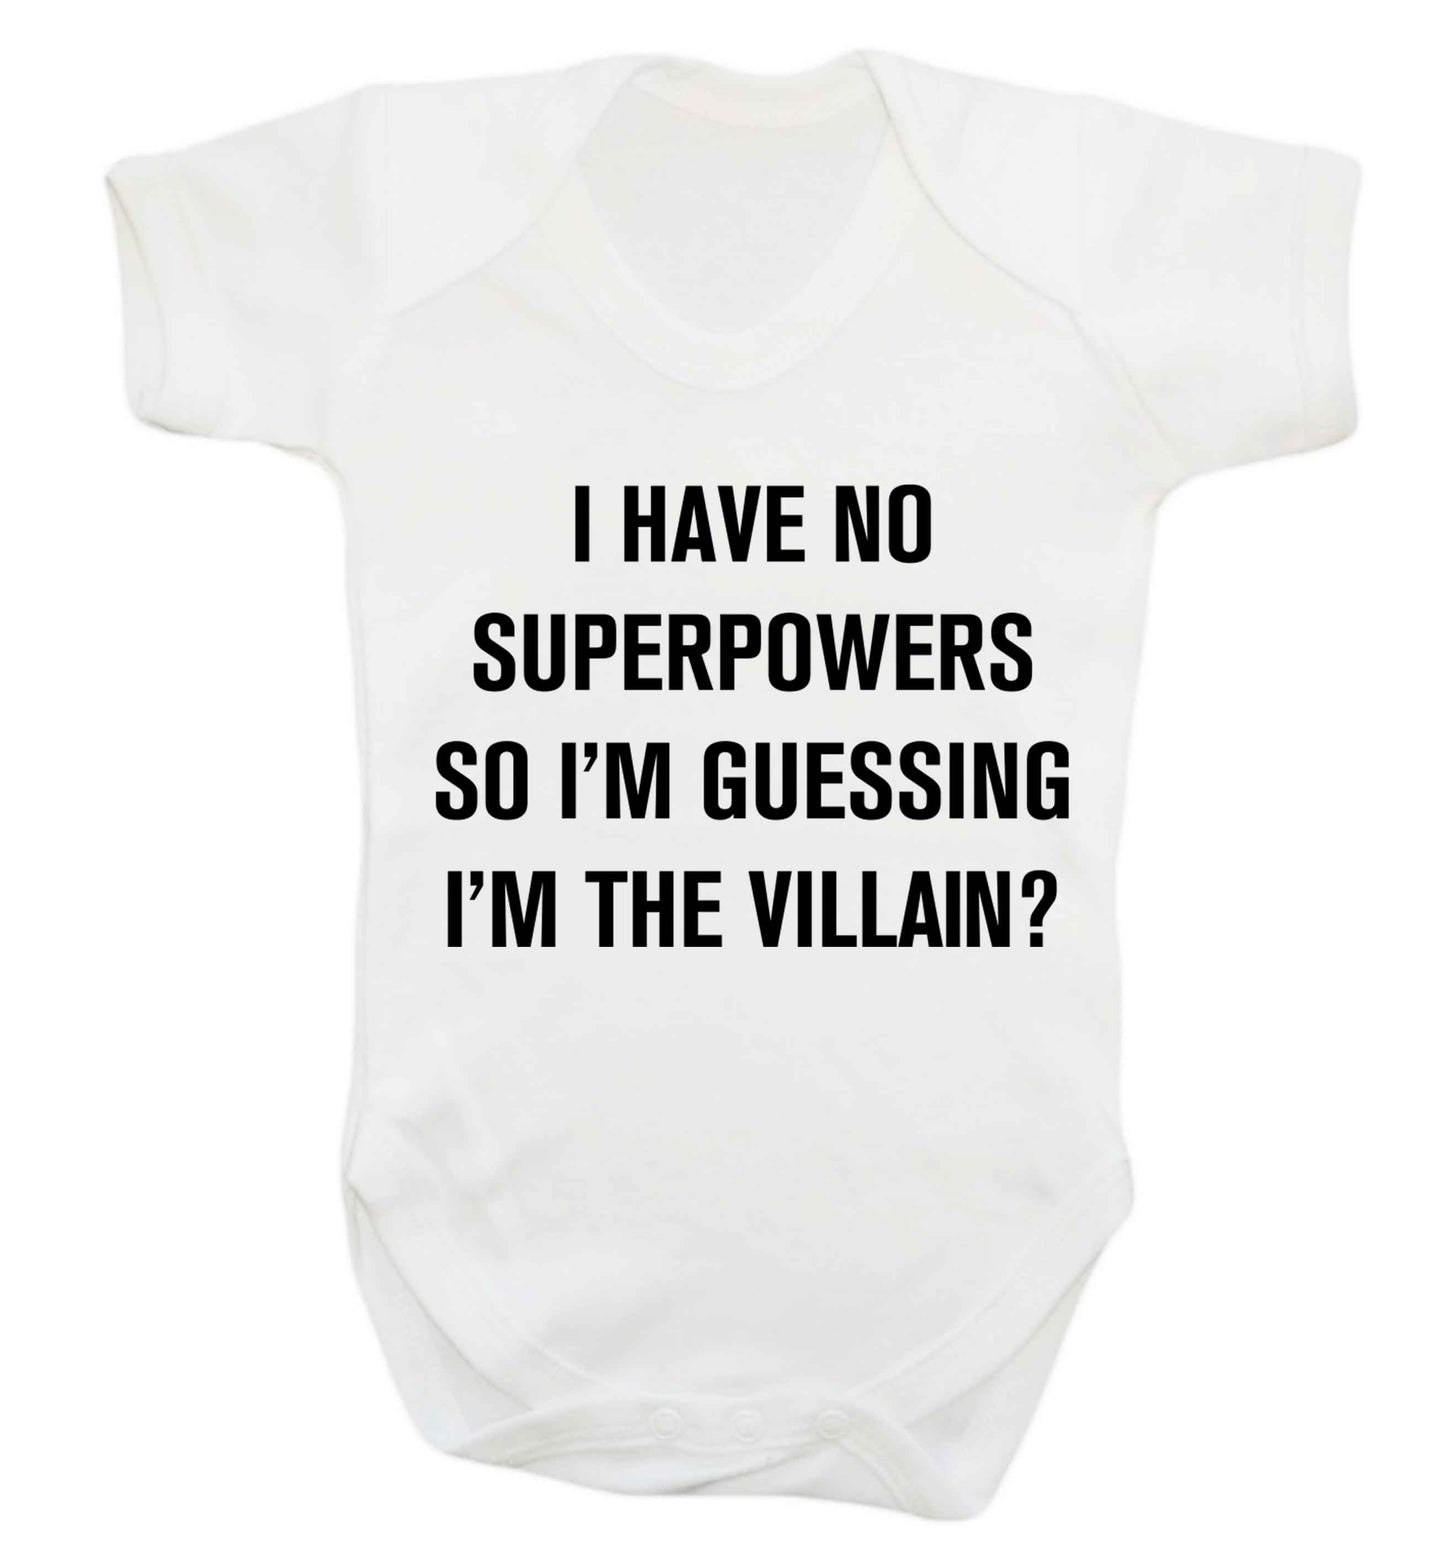 I have no superpowers so I'm guessing I'm the villain? Baby Vest white 18-24 months